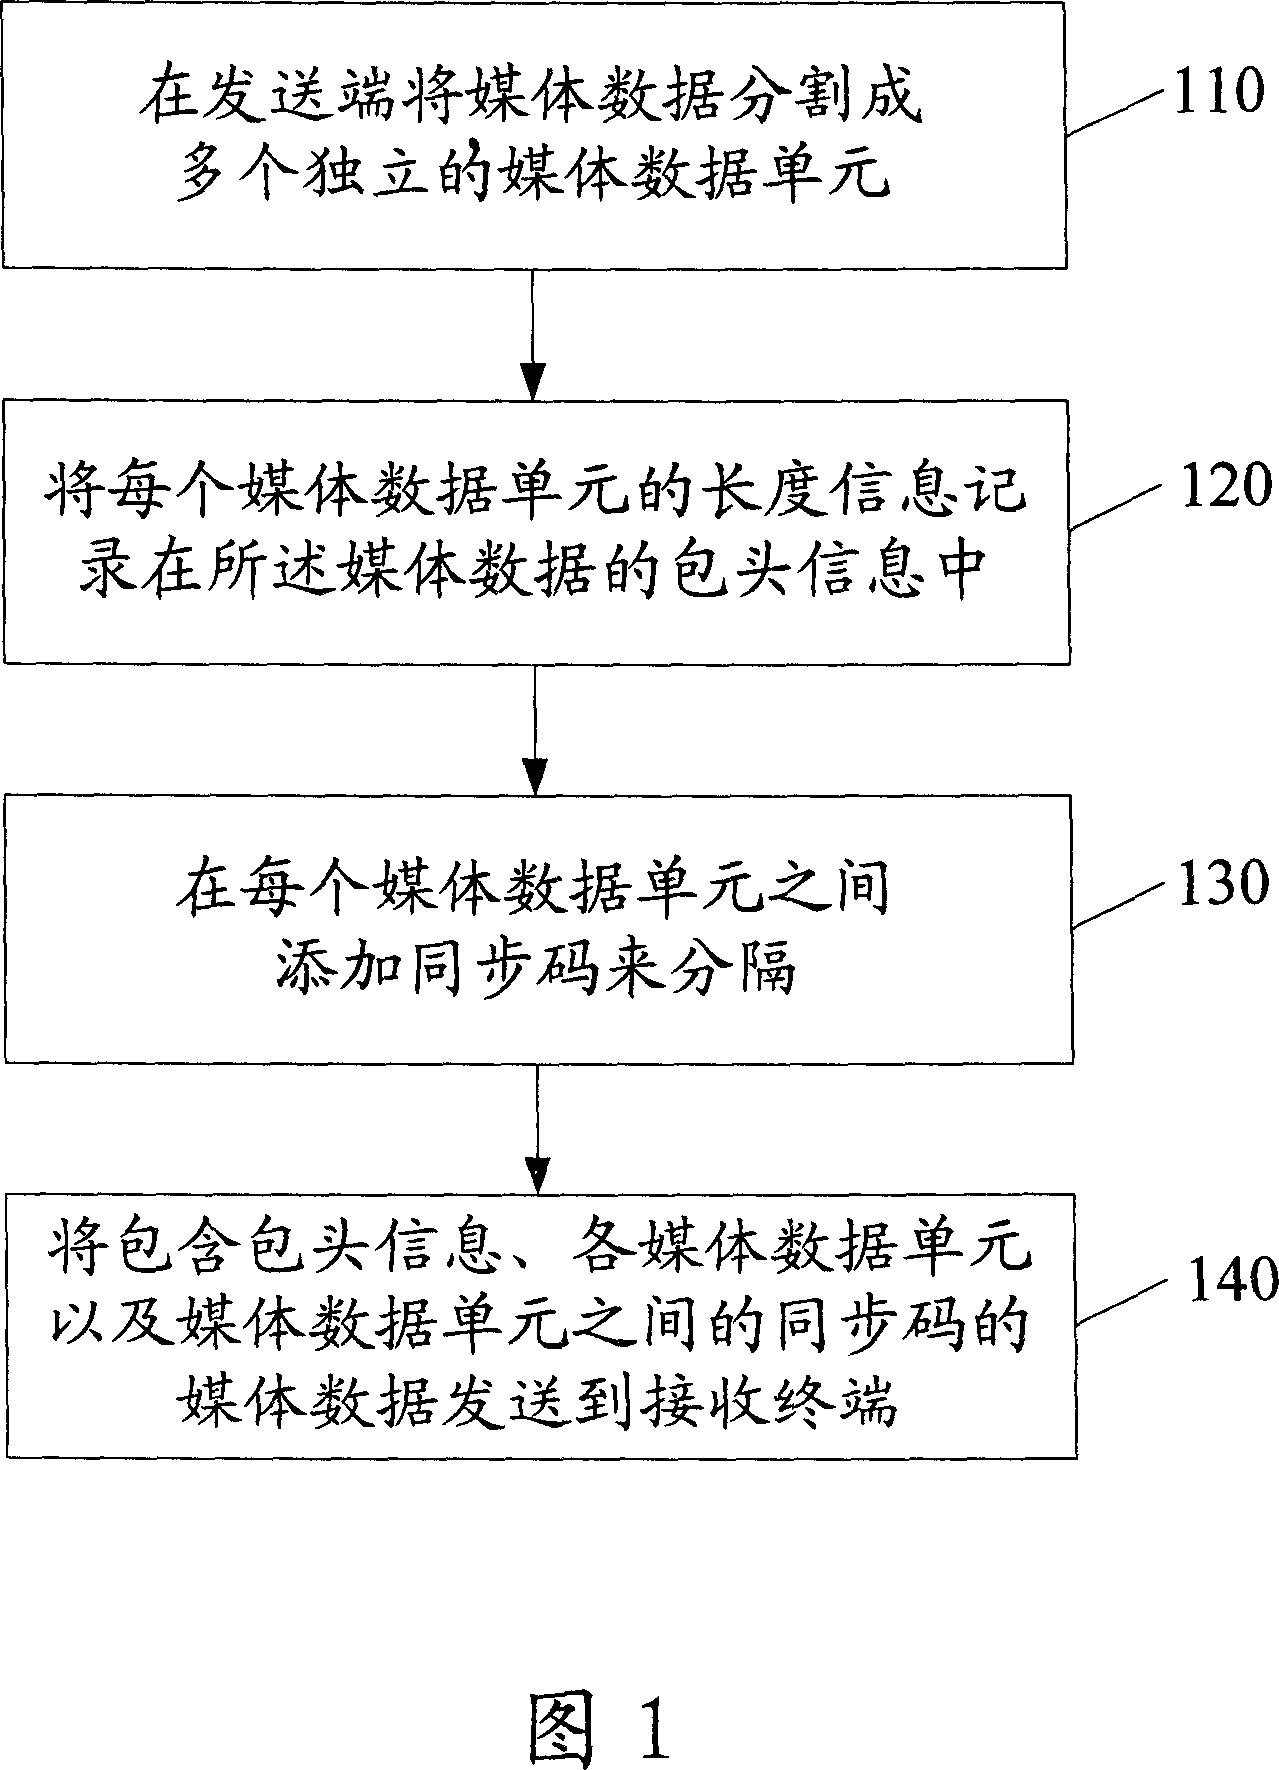 Method for implementing fault isolation in time of transferring media data of mobile multimedia broadcast